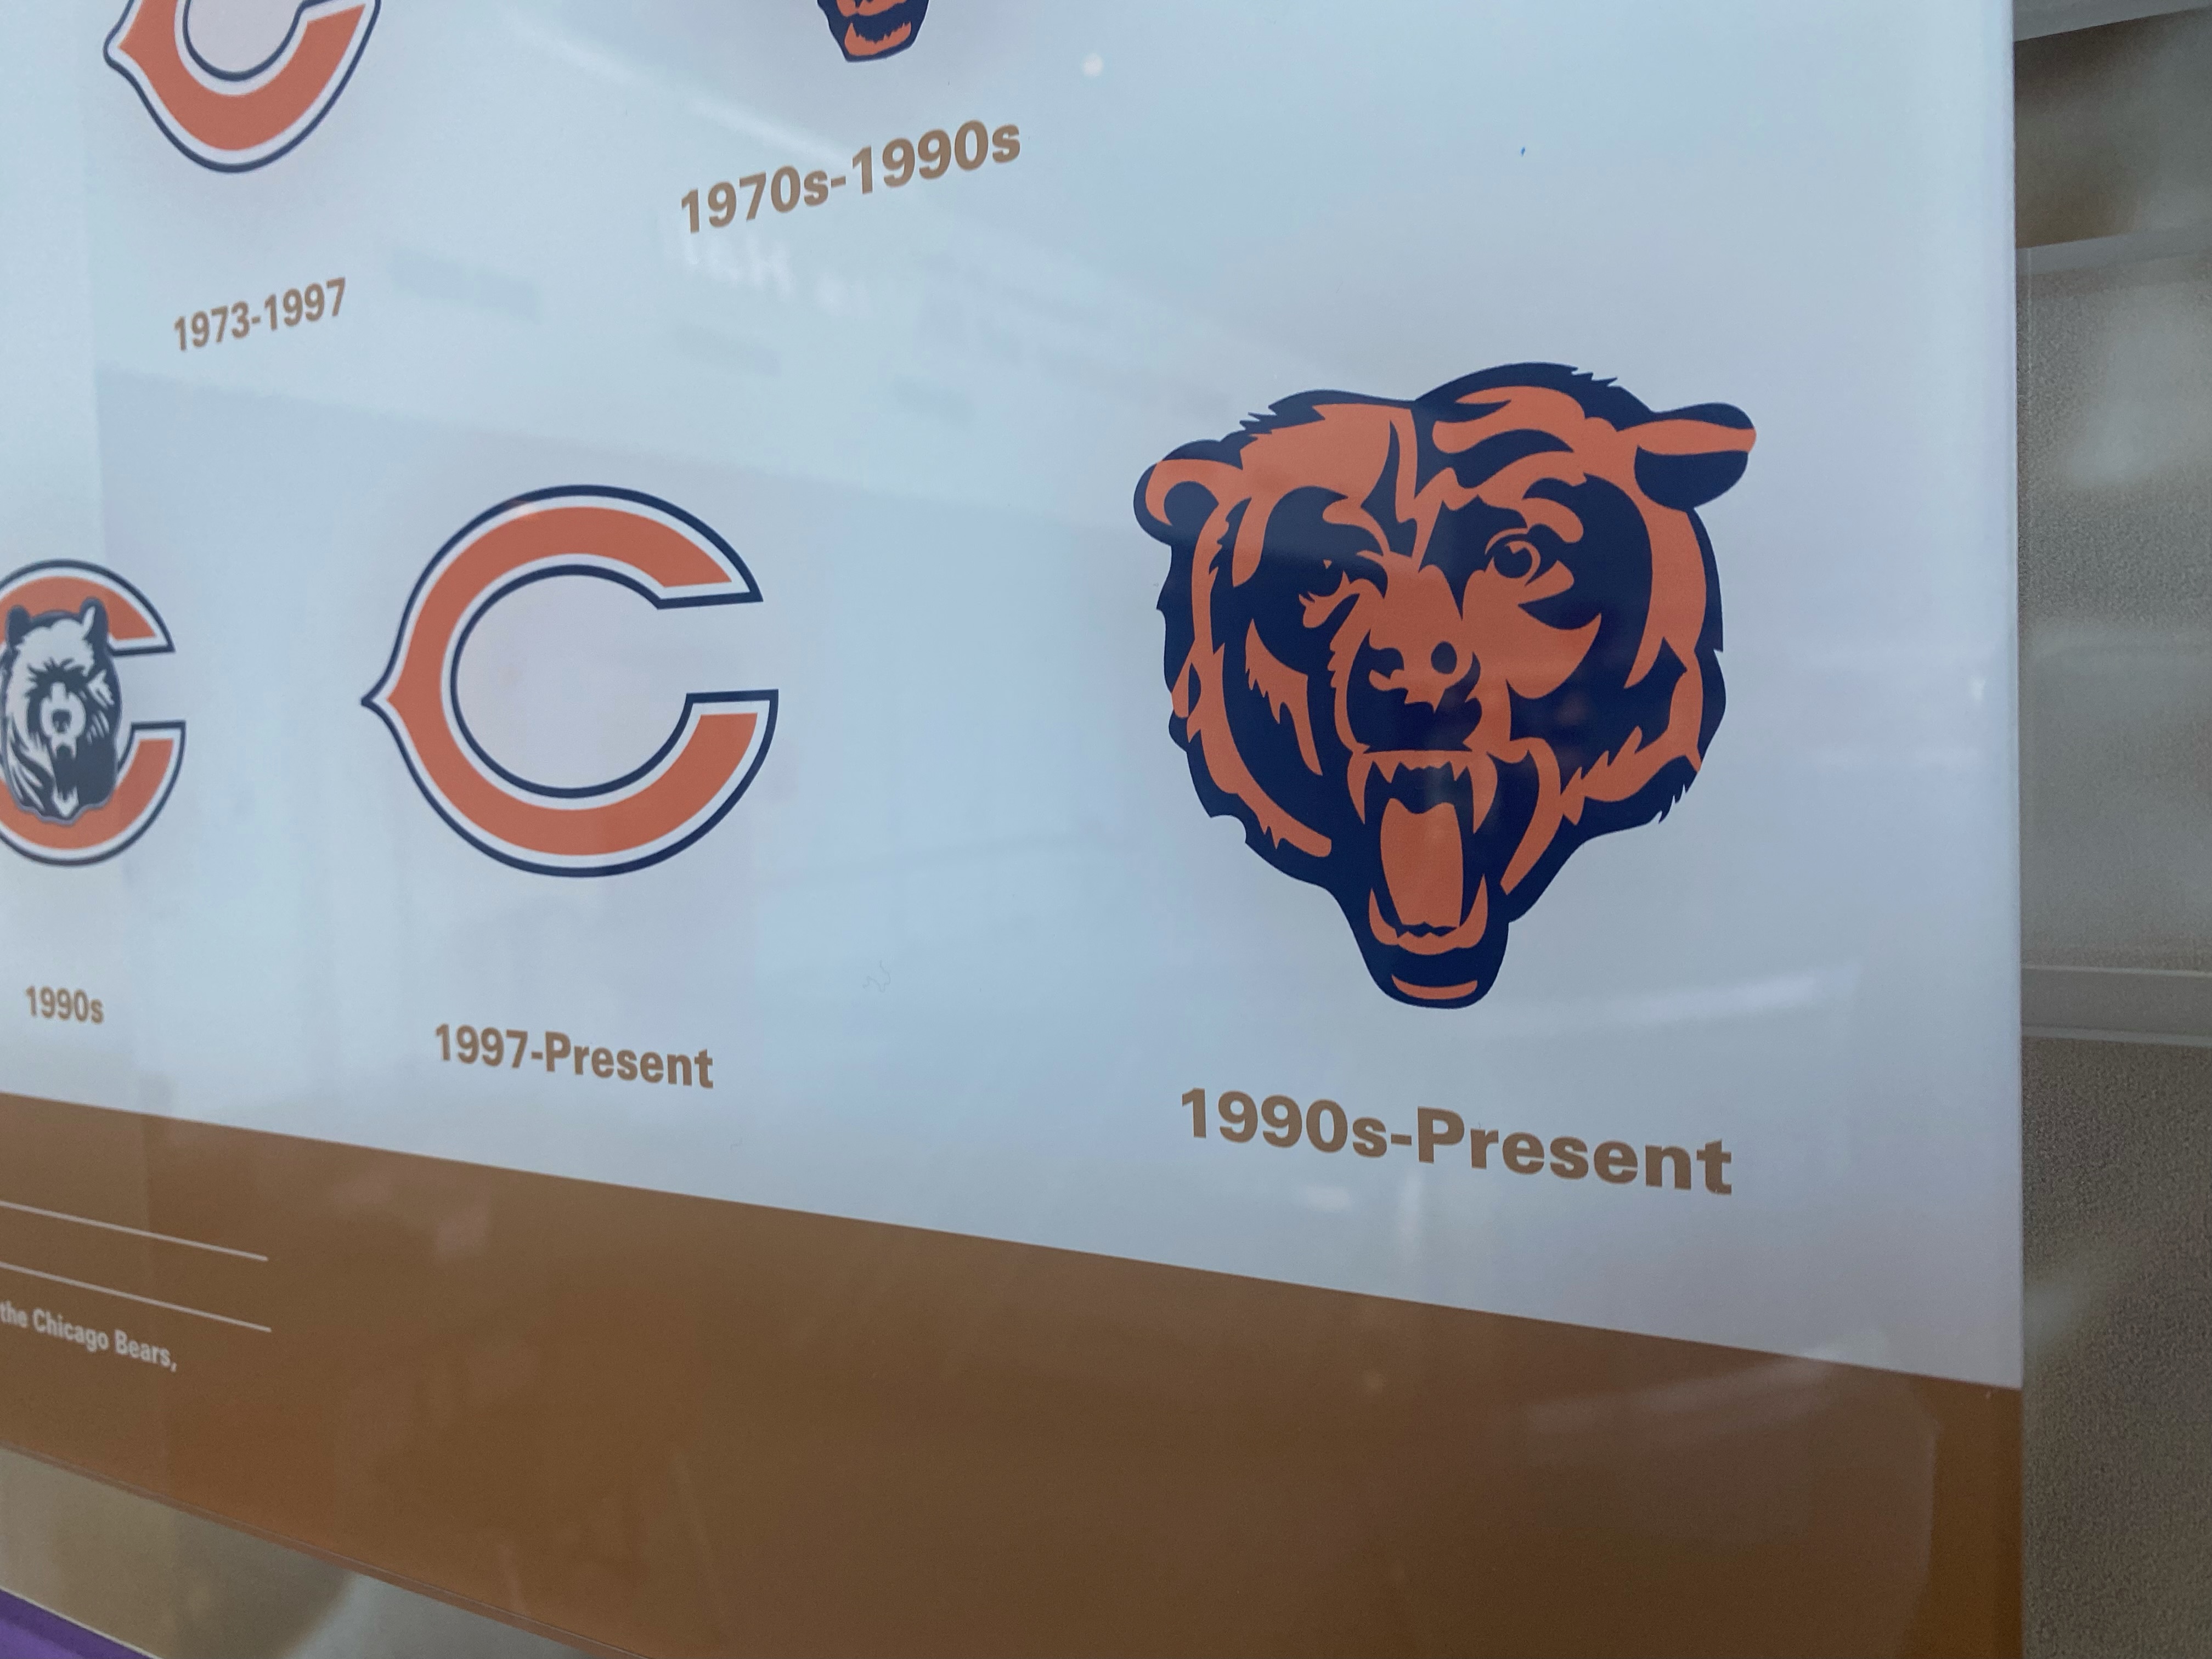 Patrick Finley on X: This offseason the #Bears made the bear head logo  their primary one. Before it shared co-primary honors with the wishbone C.  The uniforms won't change. The midfield logo